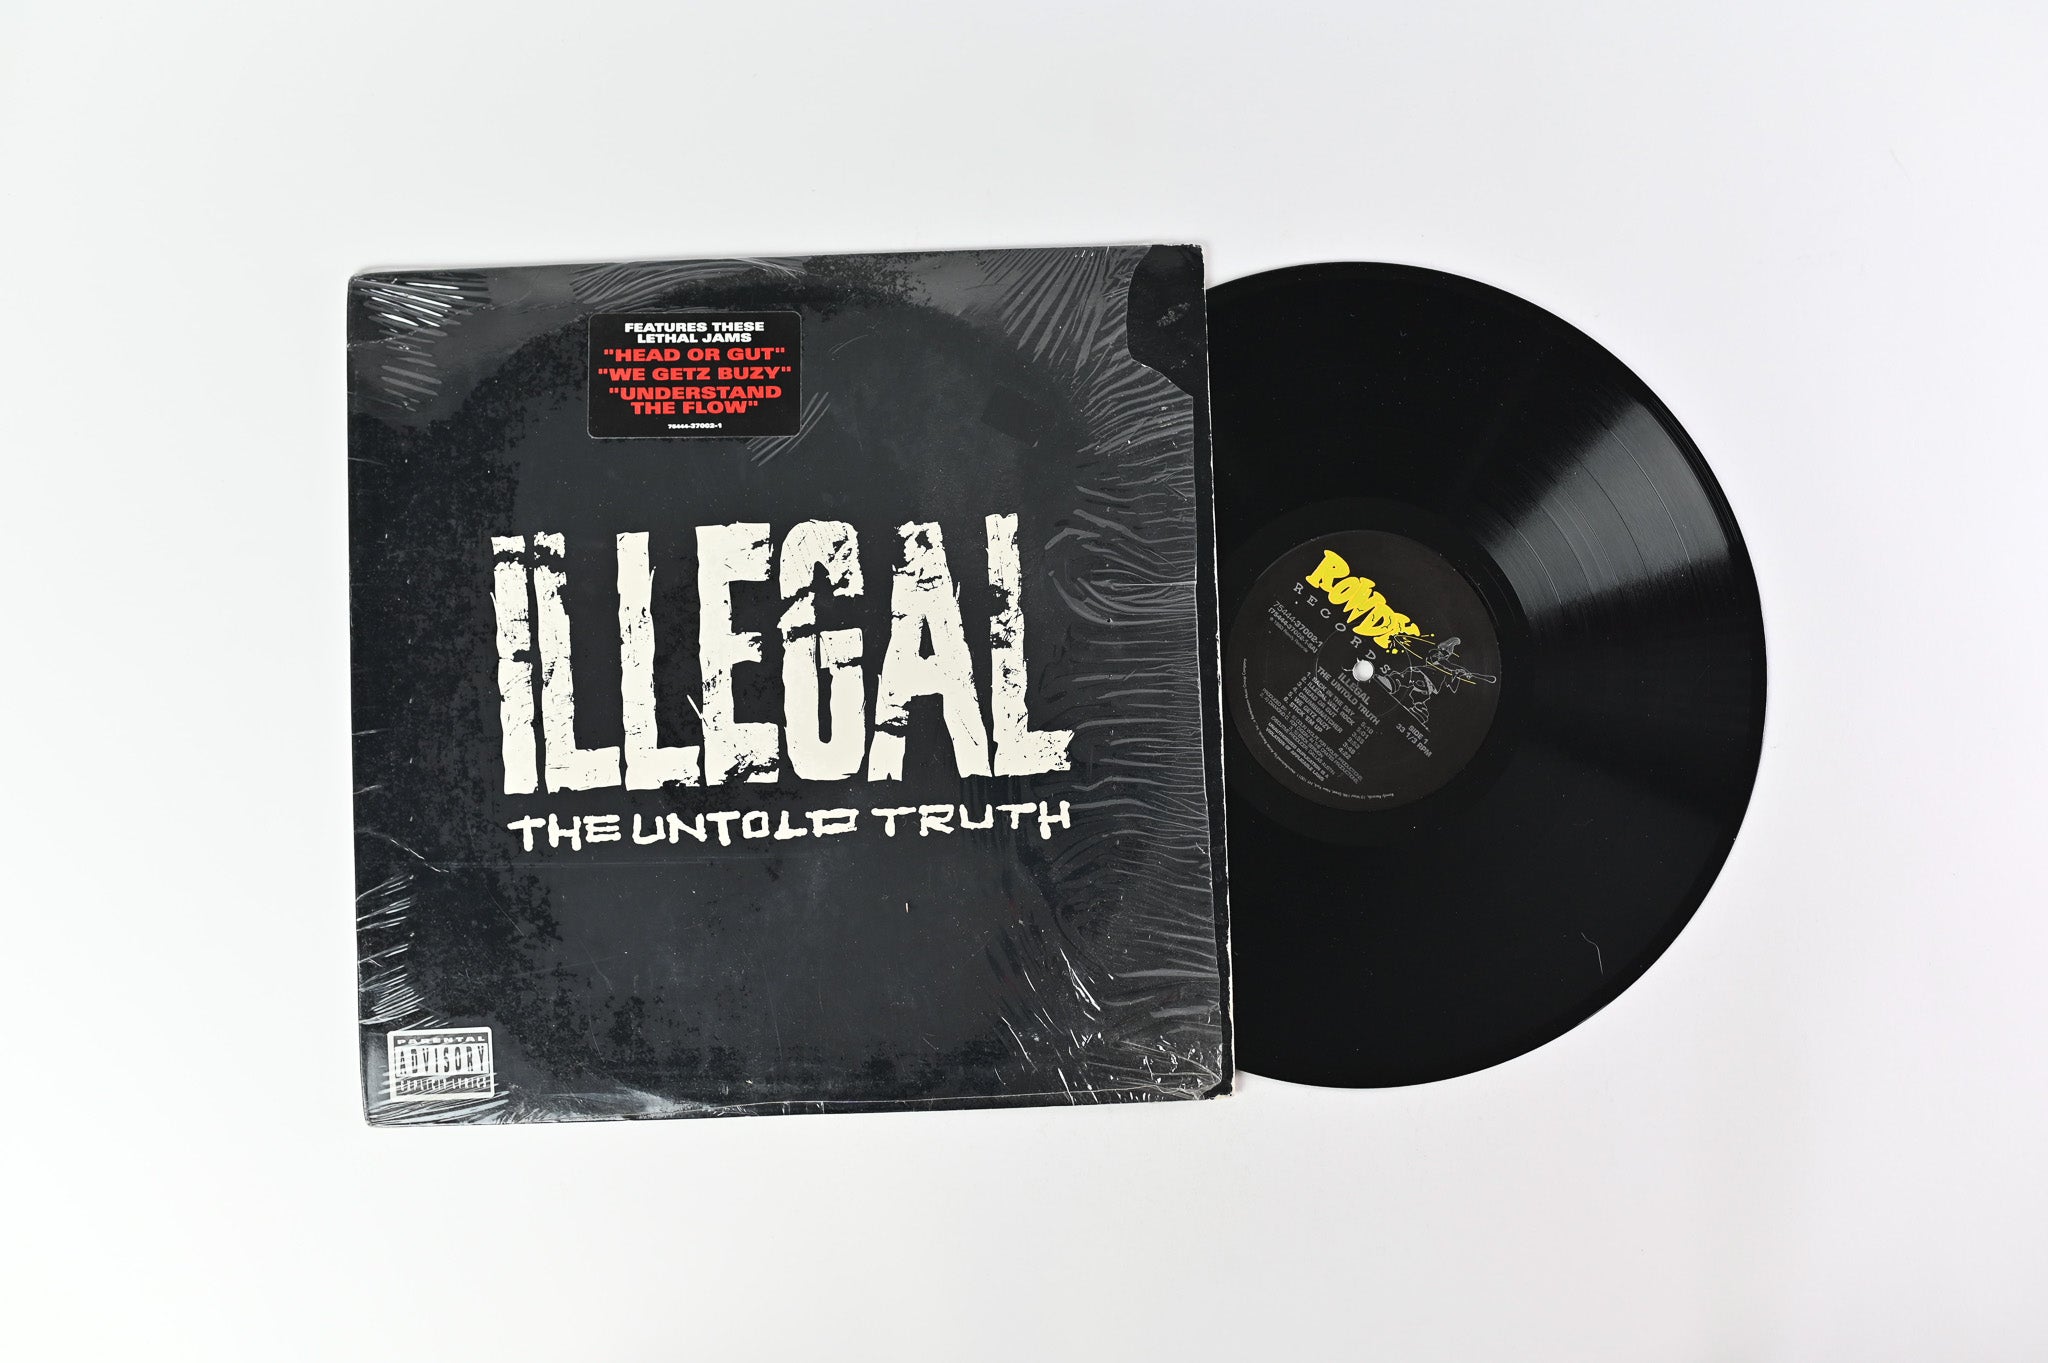 Illegal - The Untold Truth on Rowdy Records